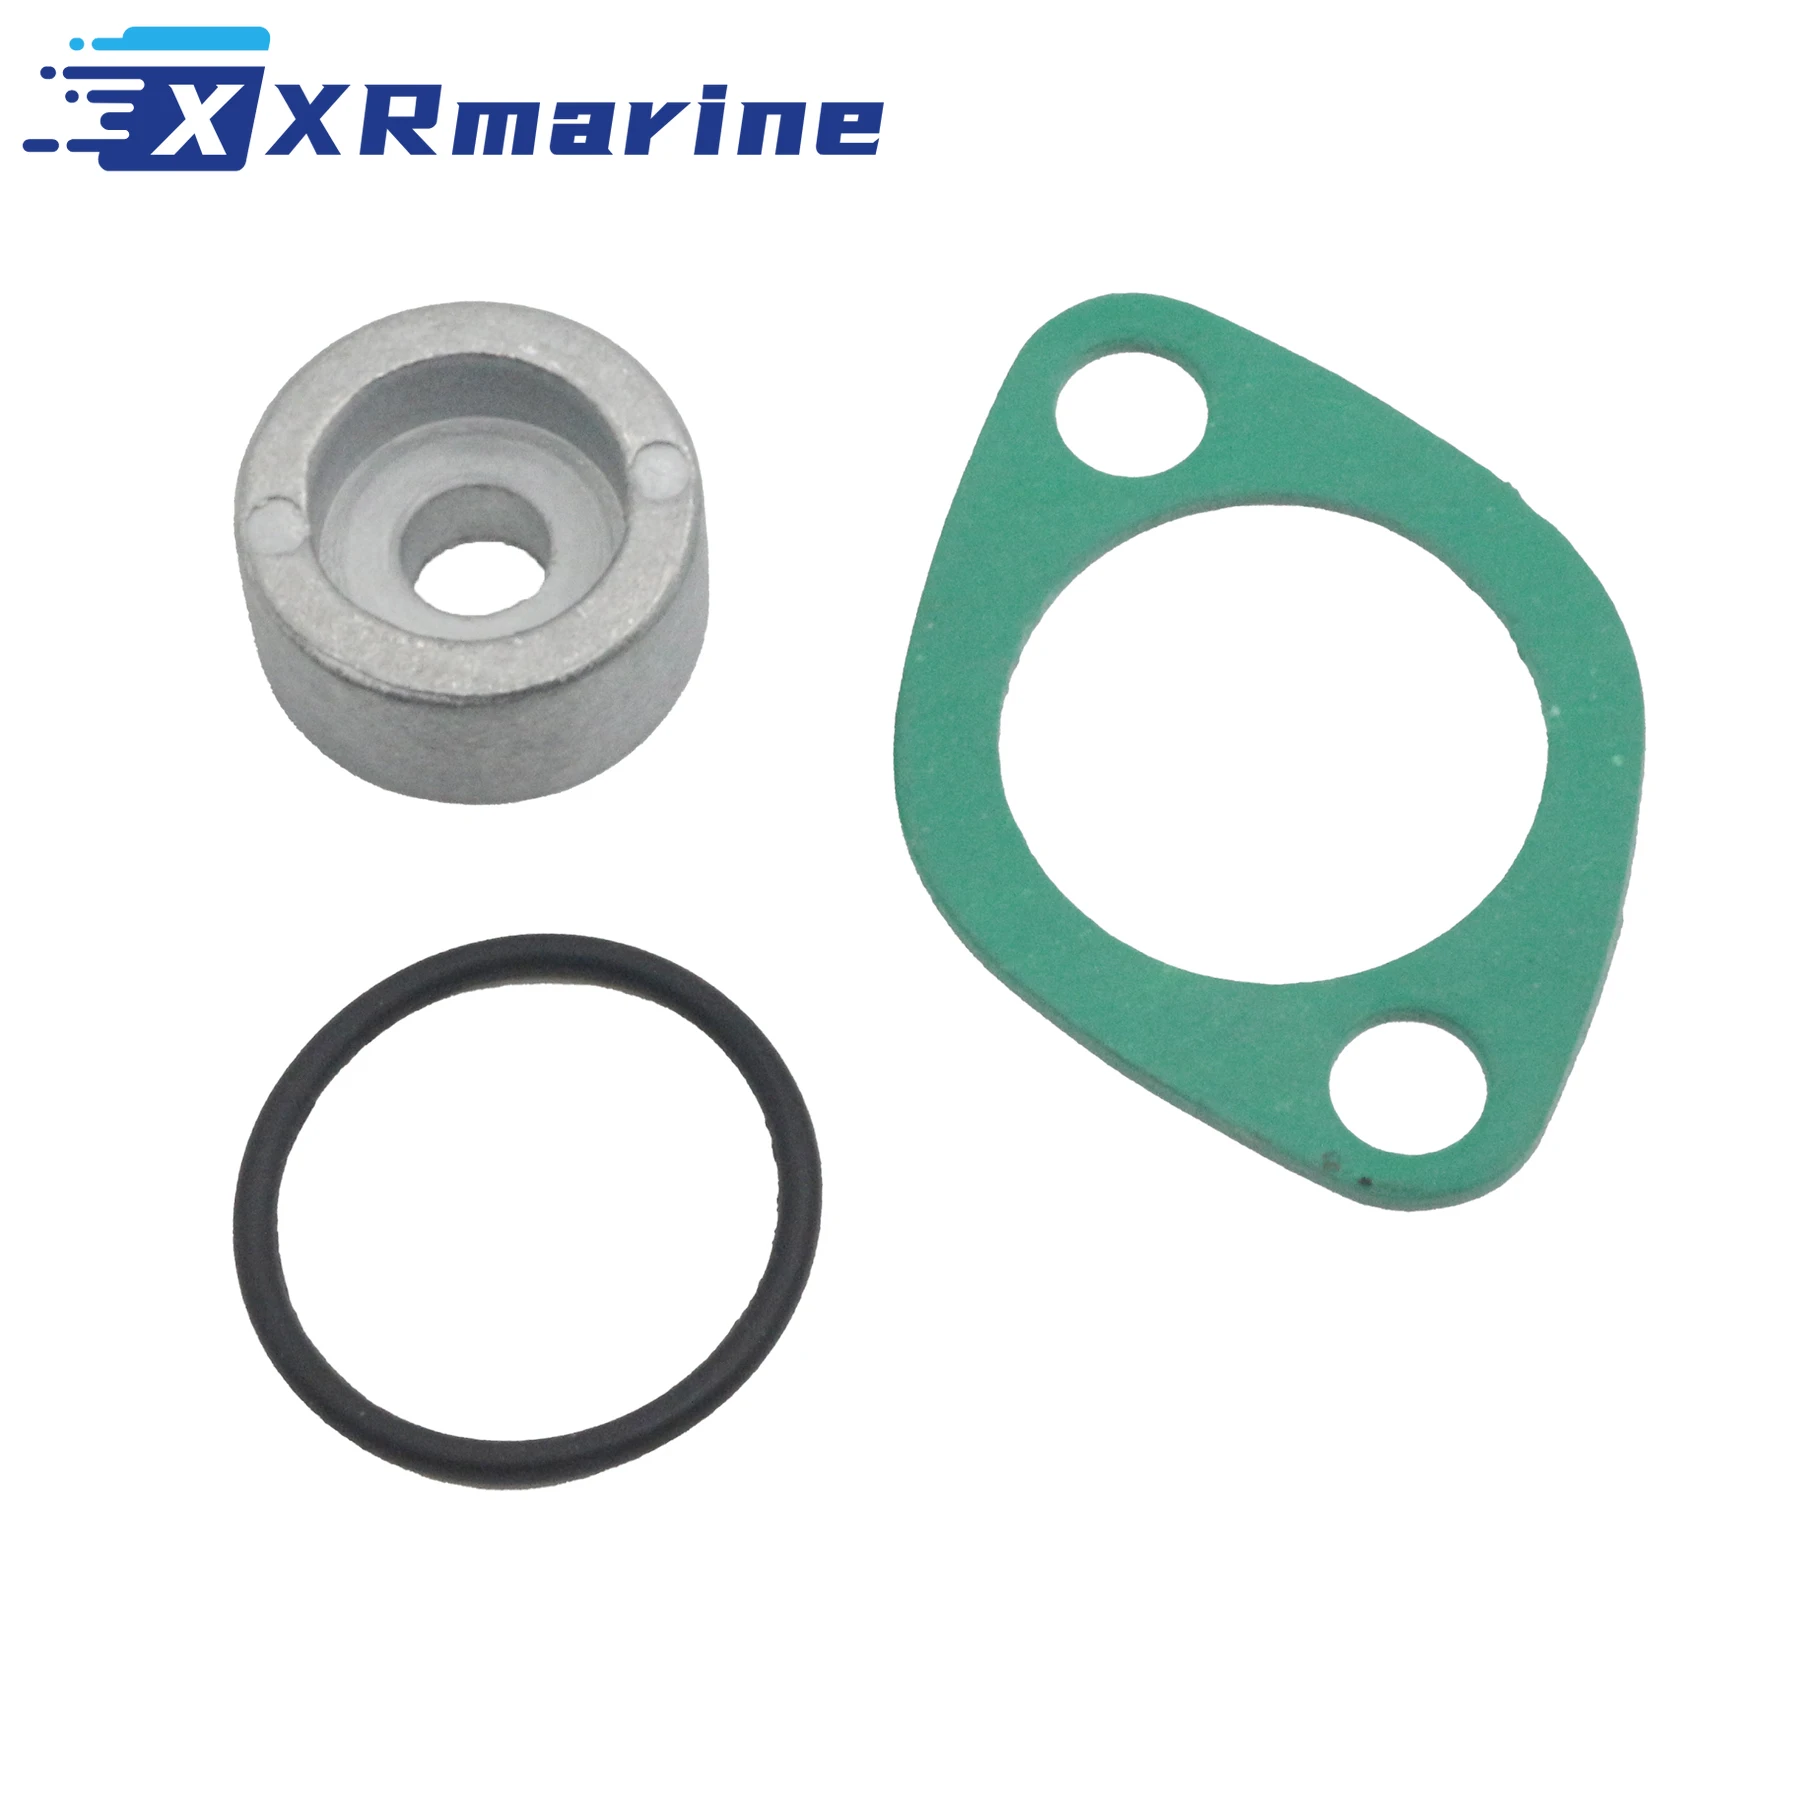 Maintenance Kit For Suzuki 4-Stroke 25HP DF25 30HP DF30 Outboard Engines 17400-89820 17400-89822